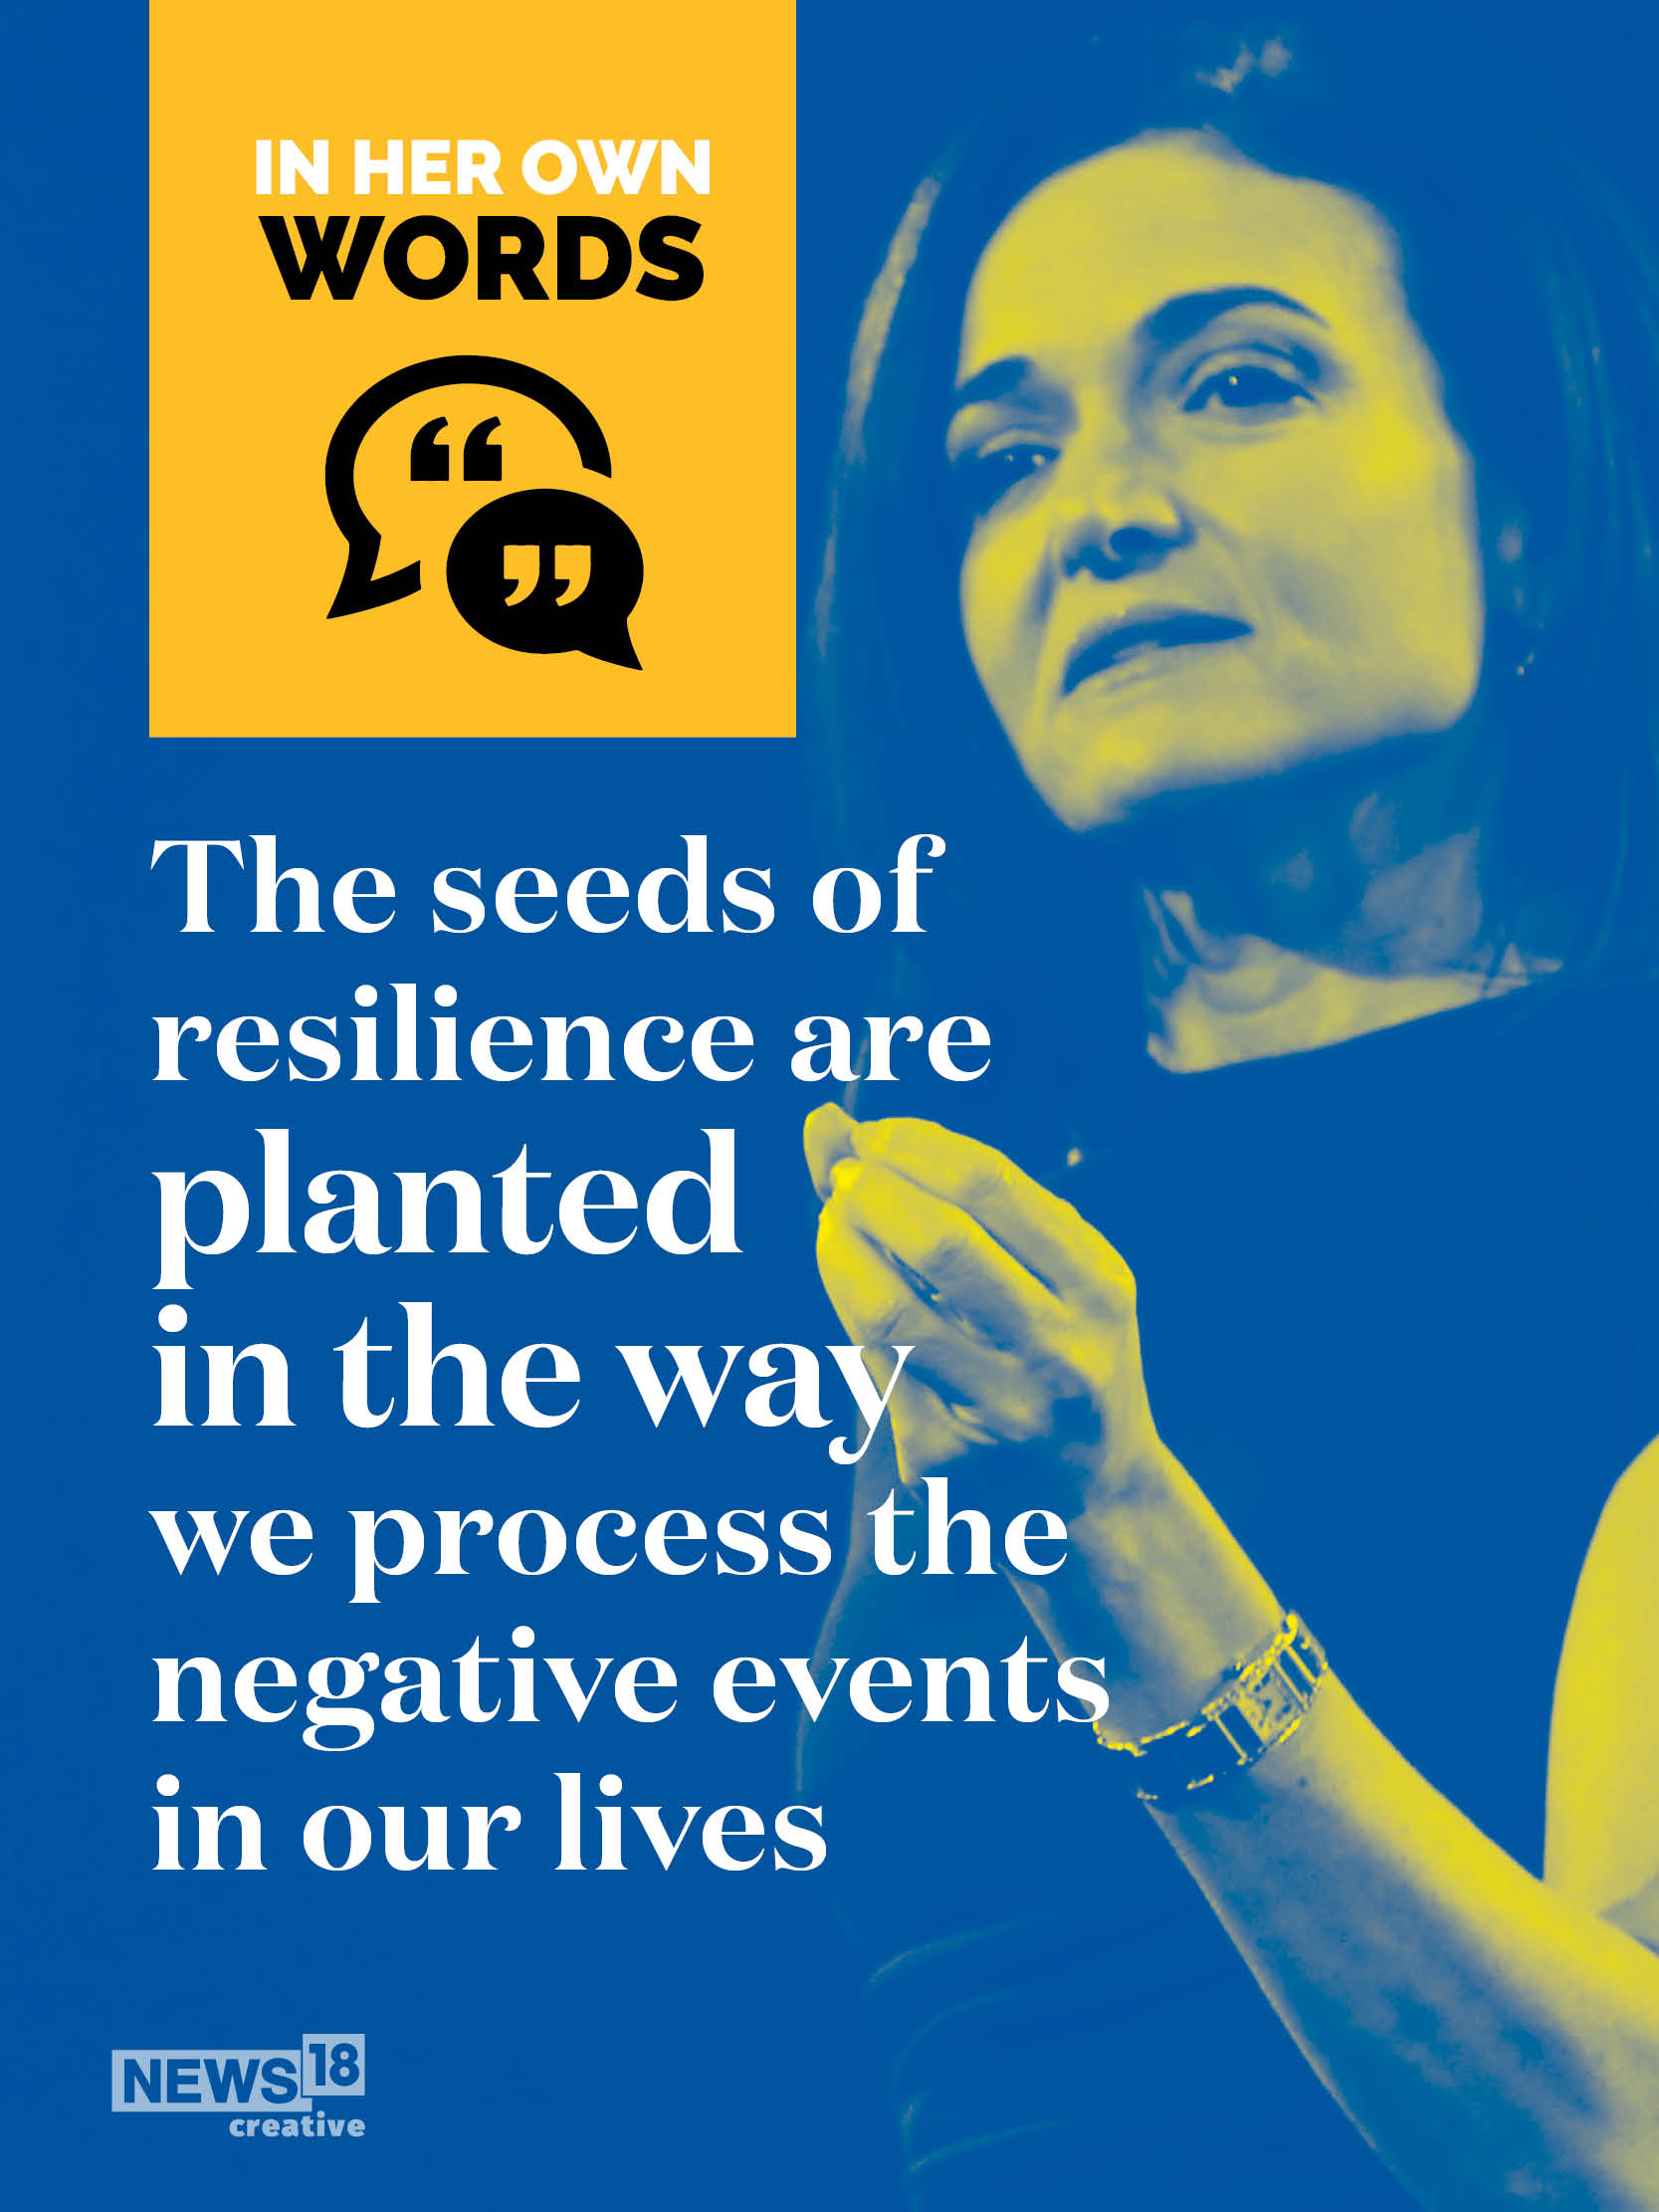 From World Bank to Meta, a look at Sheryl Sandberg's journey as one of the world's most influential women